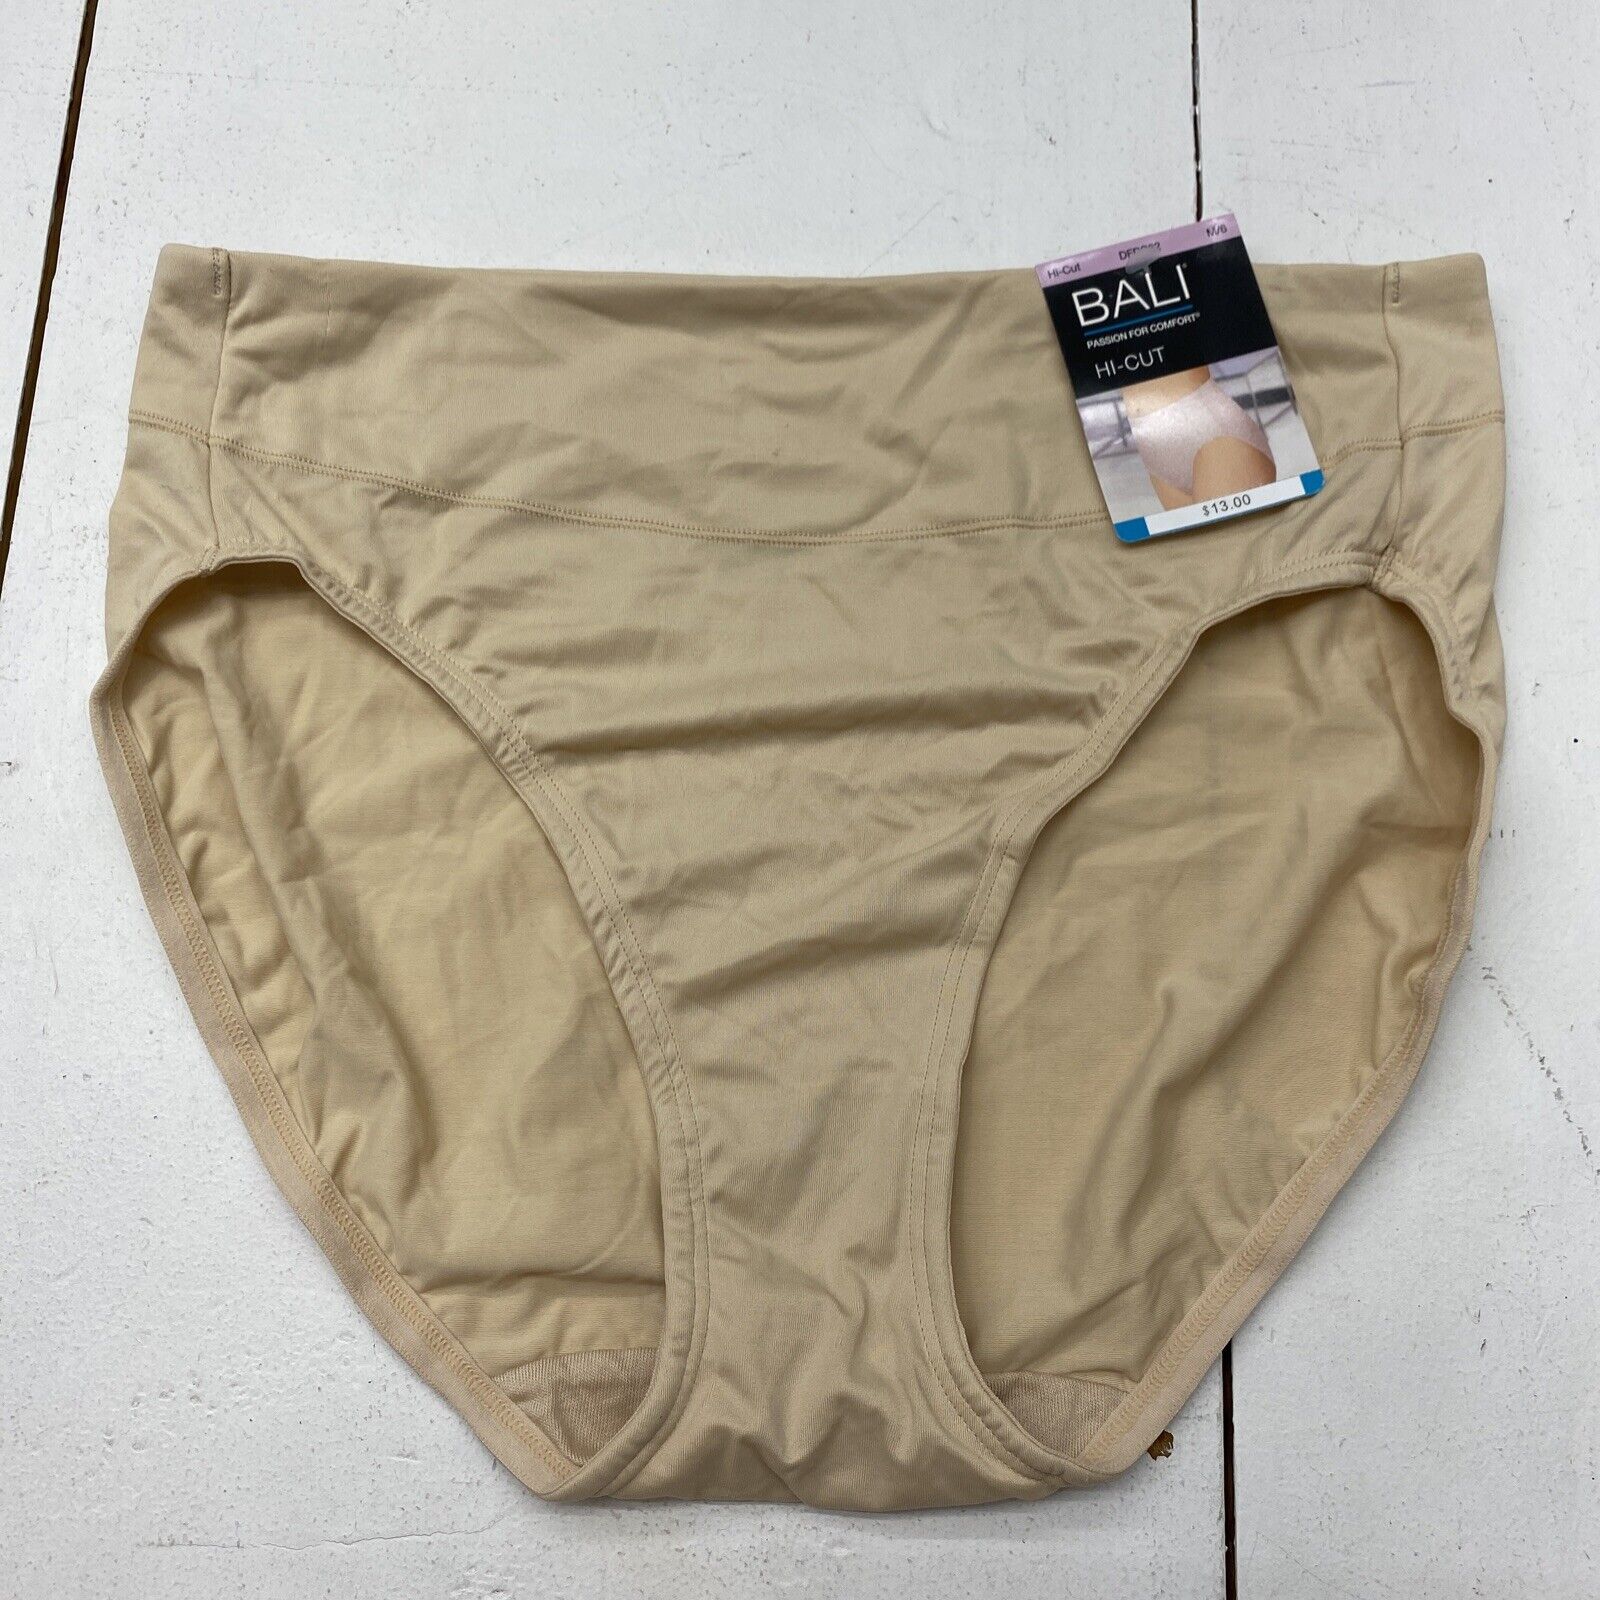 Bali Passion for Comfort Hi-Cut Panty Soft Taupe Womens Size M/6 New -  beyond exchange